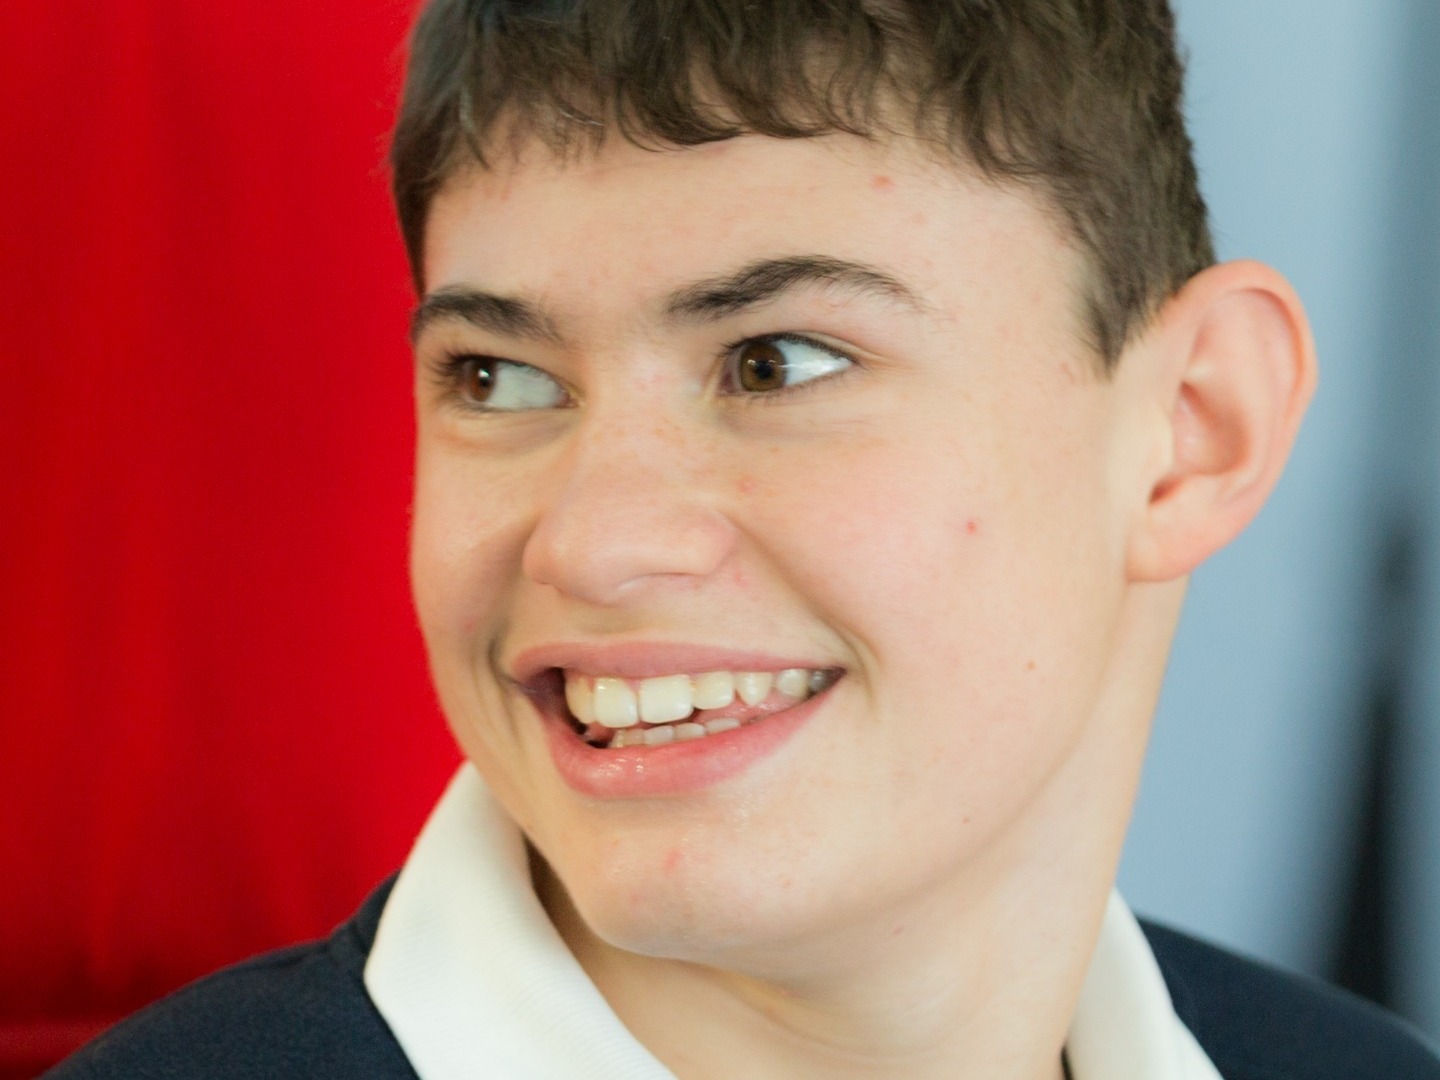 Teenage boy with learning difficulties in school uniform for school photo